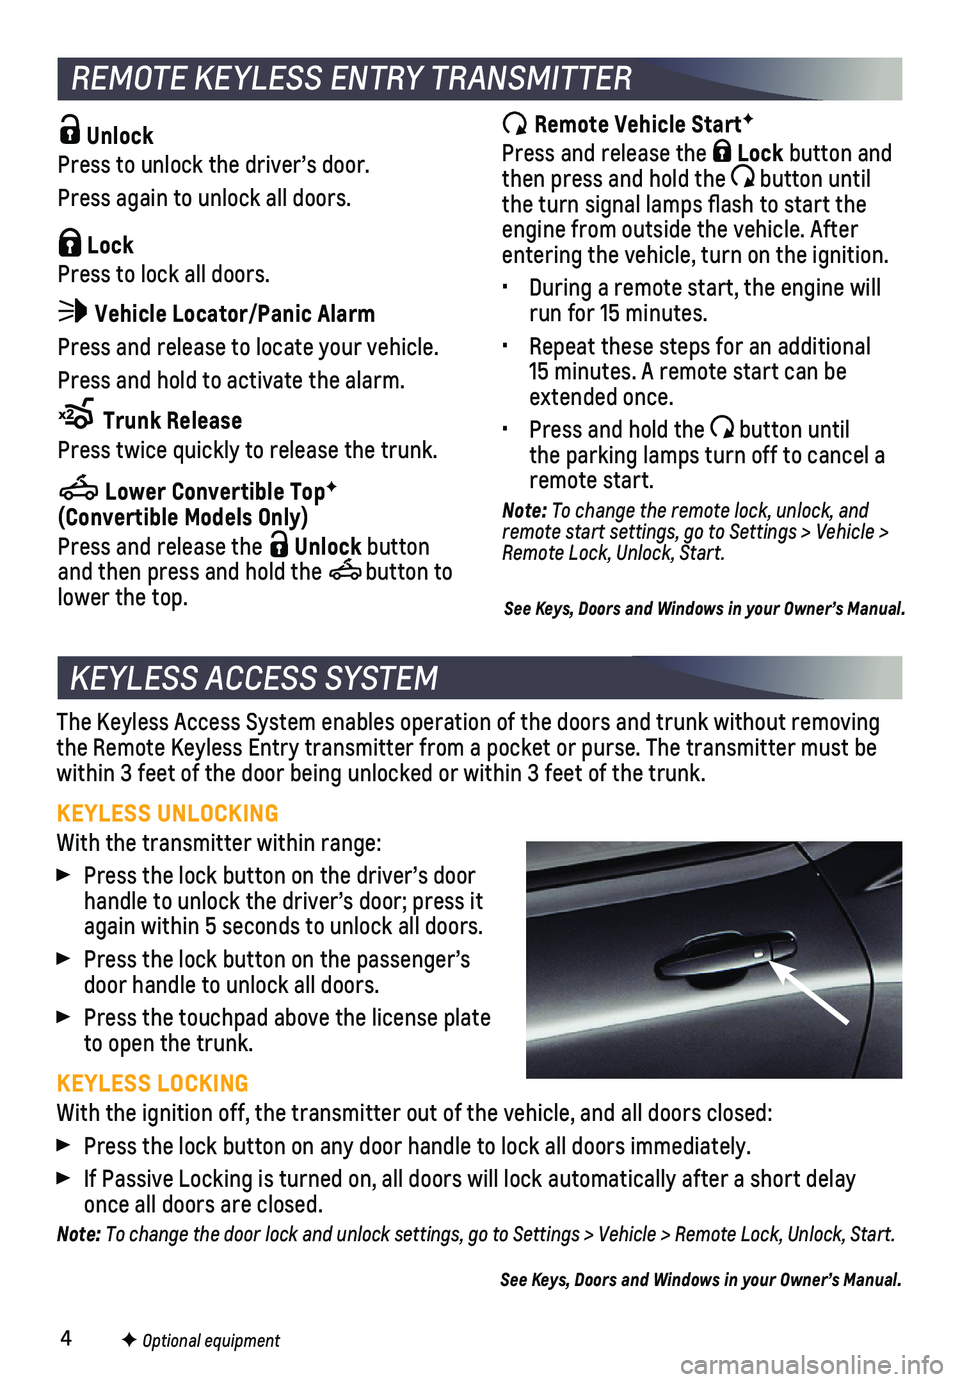 CHEVROLET CAMARO 2019  Get To Know Guide 4
The Keyless Access System enables operation of the doors and trunk witho\
ut removing the Remote Keyless Entry transmitter from a pocket or purse. The transmi\
tter must be within 3 feet of the door